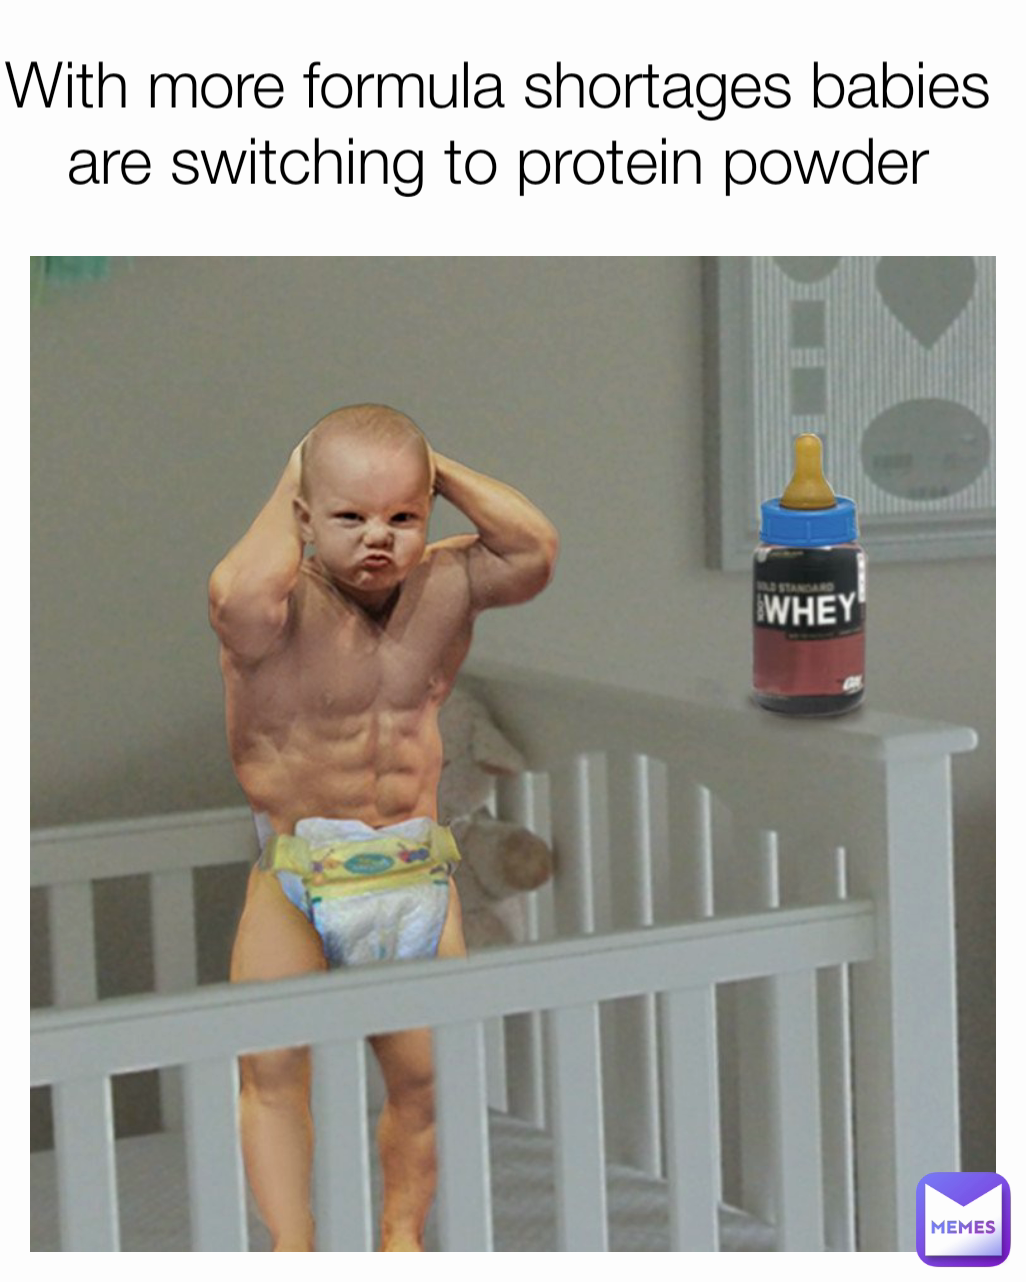 With more formula shortages babies are switching to protein powder